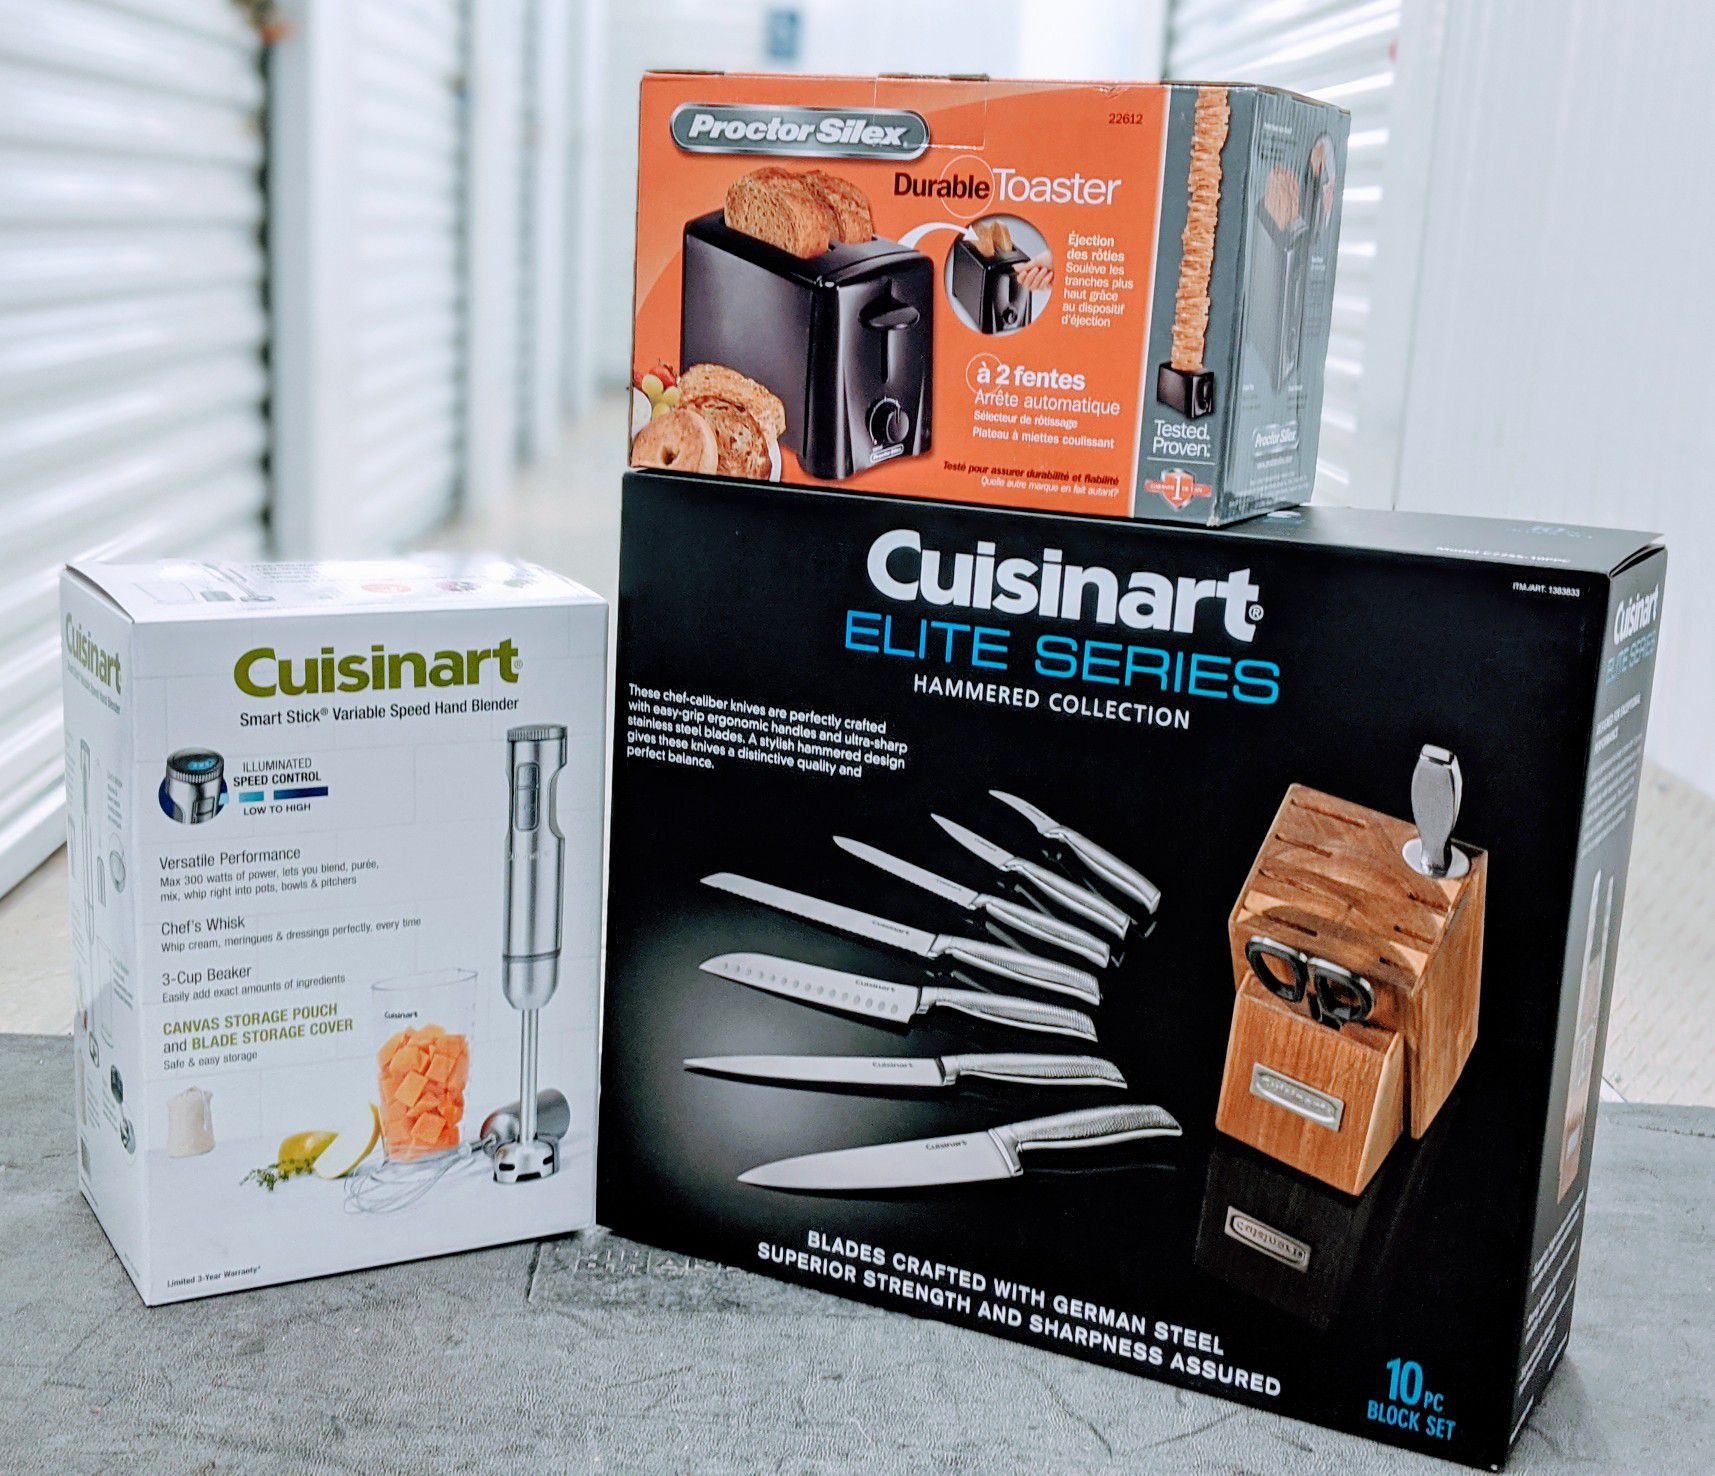 Cuisinart elite series hammered collection and hand blender (free toaster)